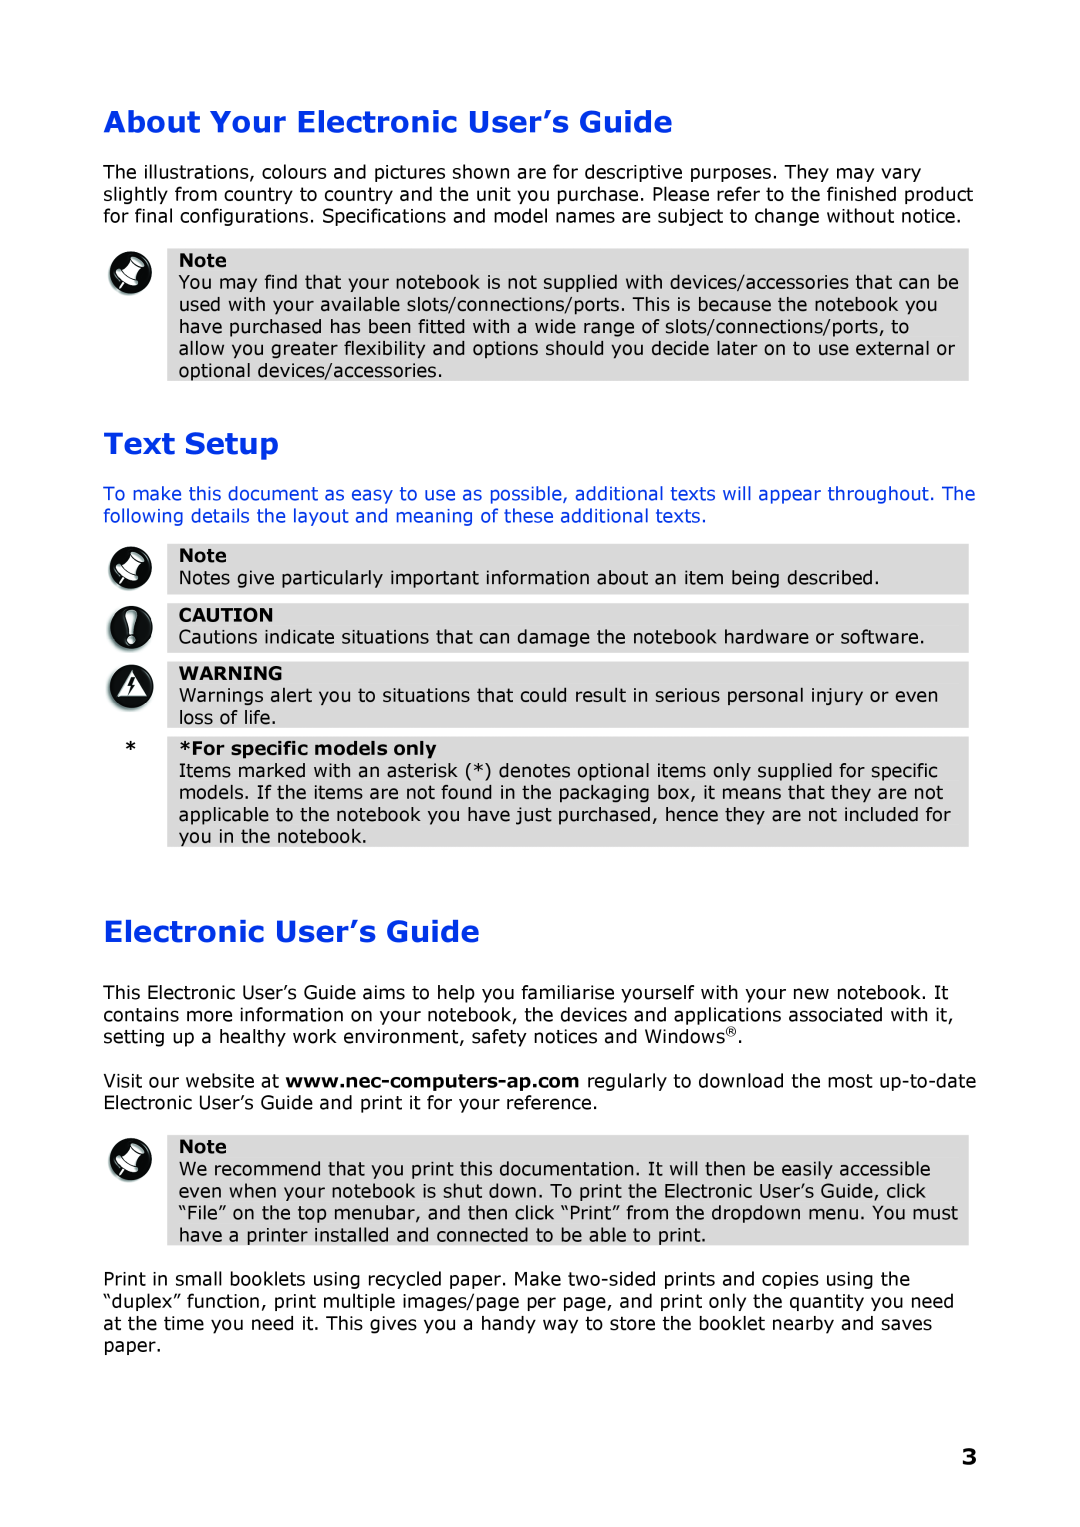 NEC P8510 manual About Your Electronic User’s Guide, Text Setup, For specific models only 